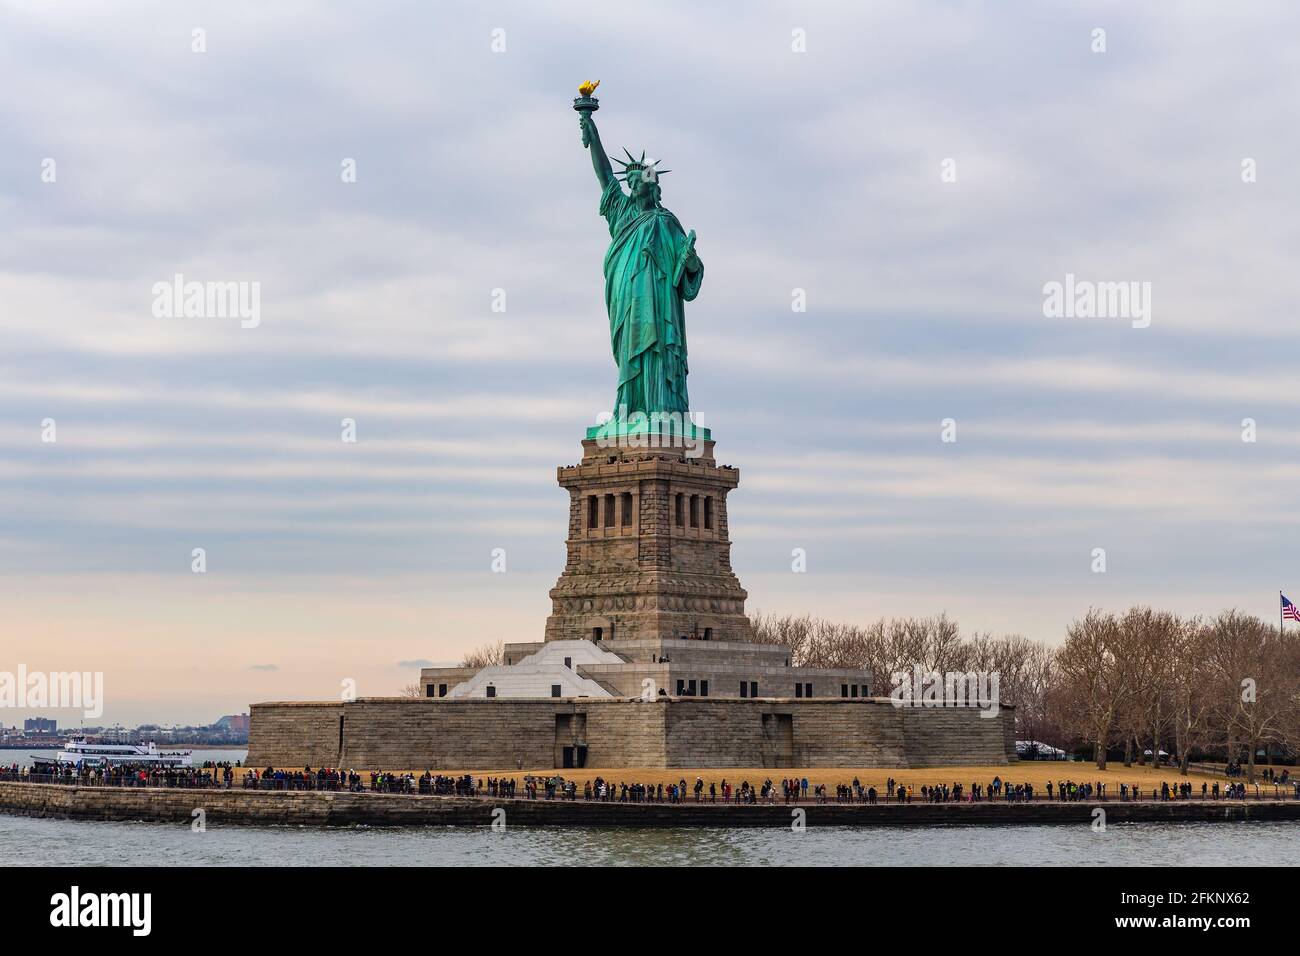 Statue of Liberty National Monument on Liberty island in New York Harbour, New York. Stock Photo